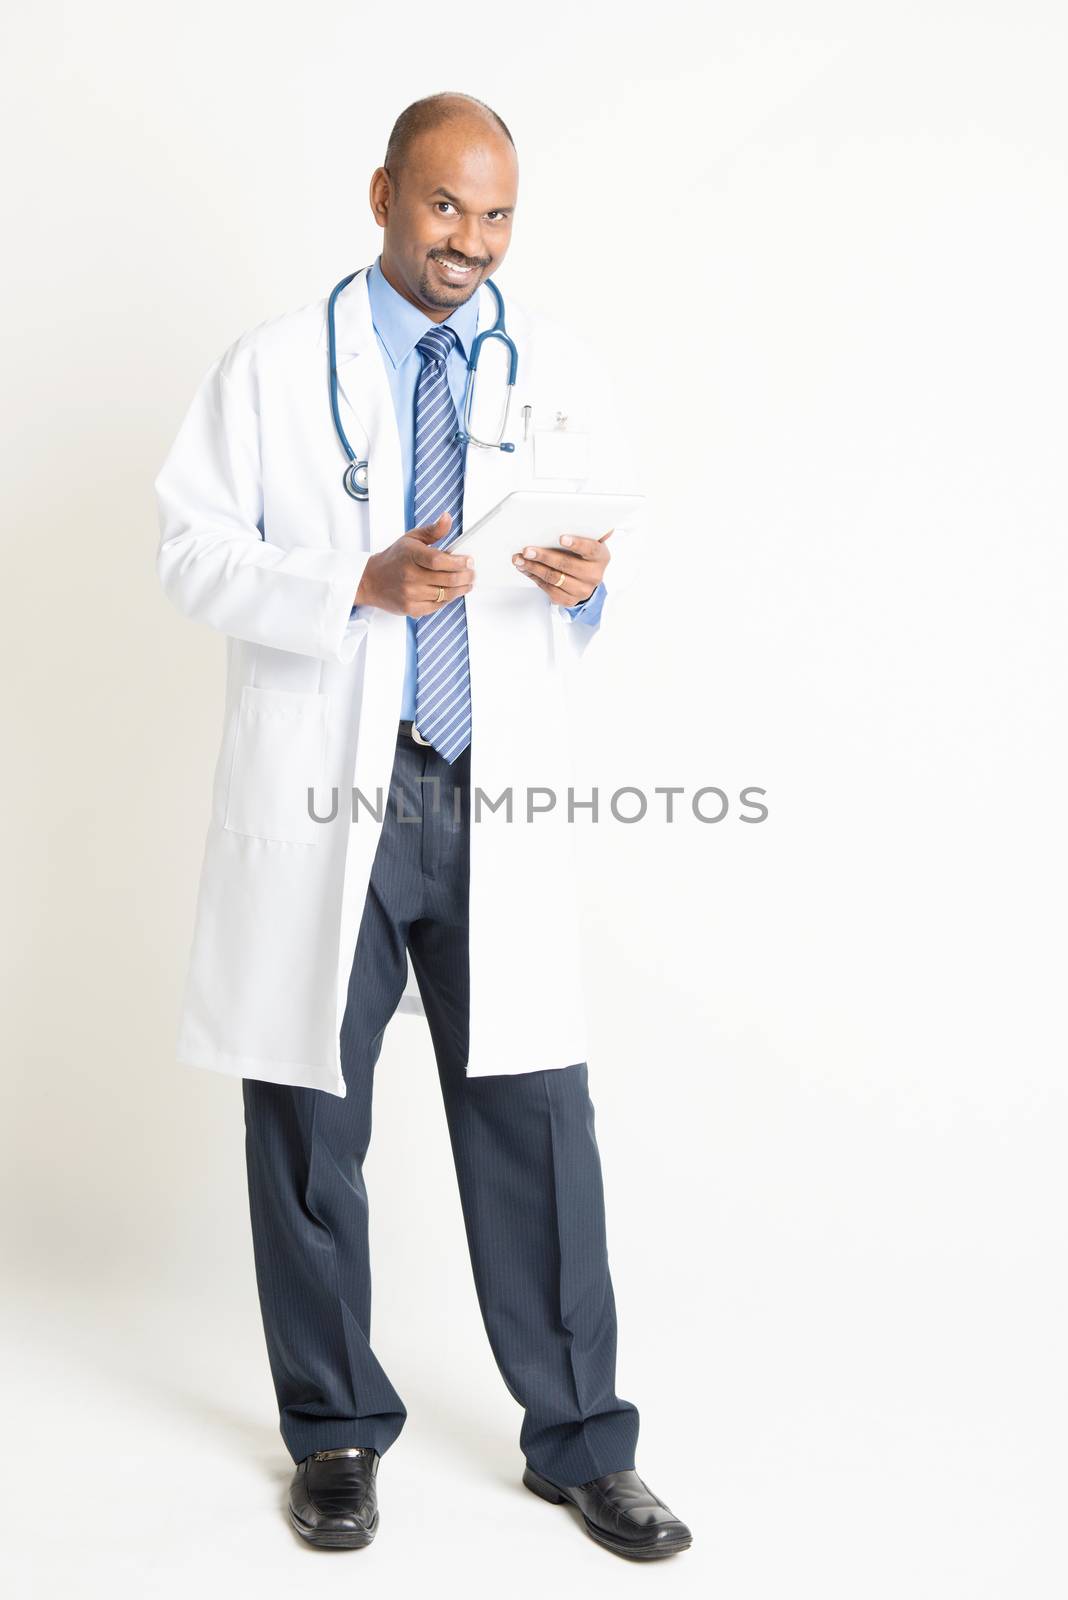 Full length mature Indian male medical doctor in uniform using digital tablet computer, standing on plain background with shadow.